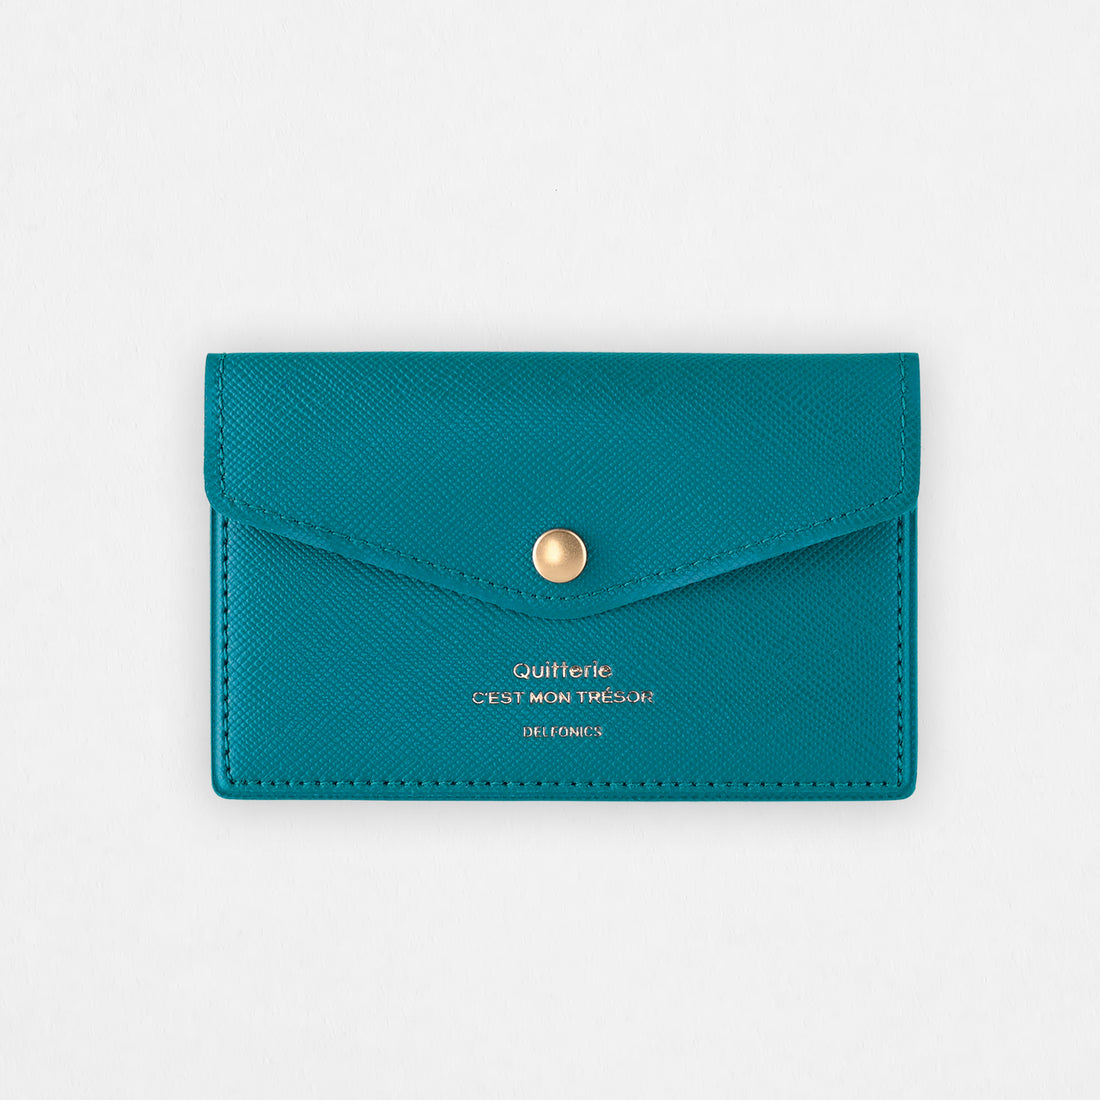 Delfonics Quitterie Card Case Turquoise 